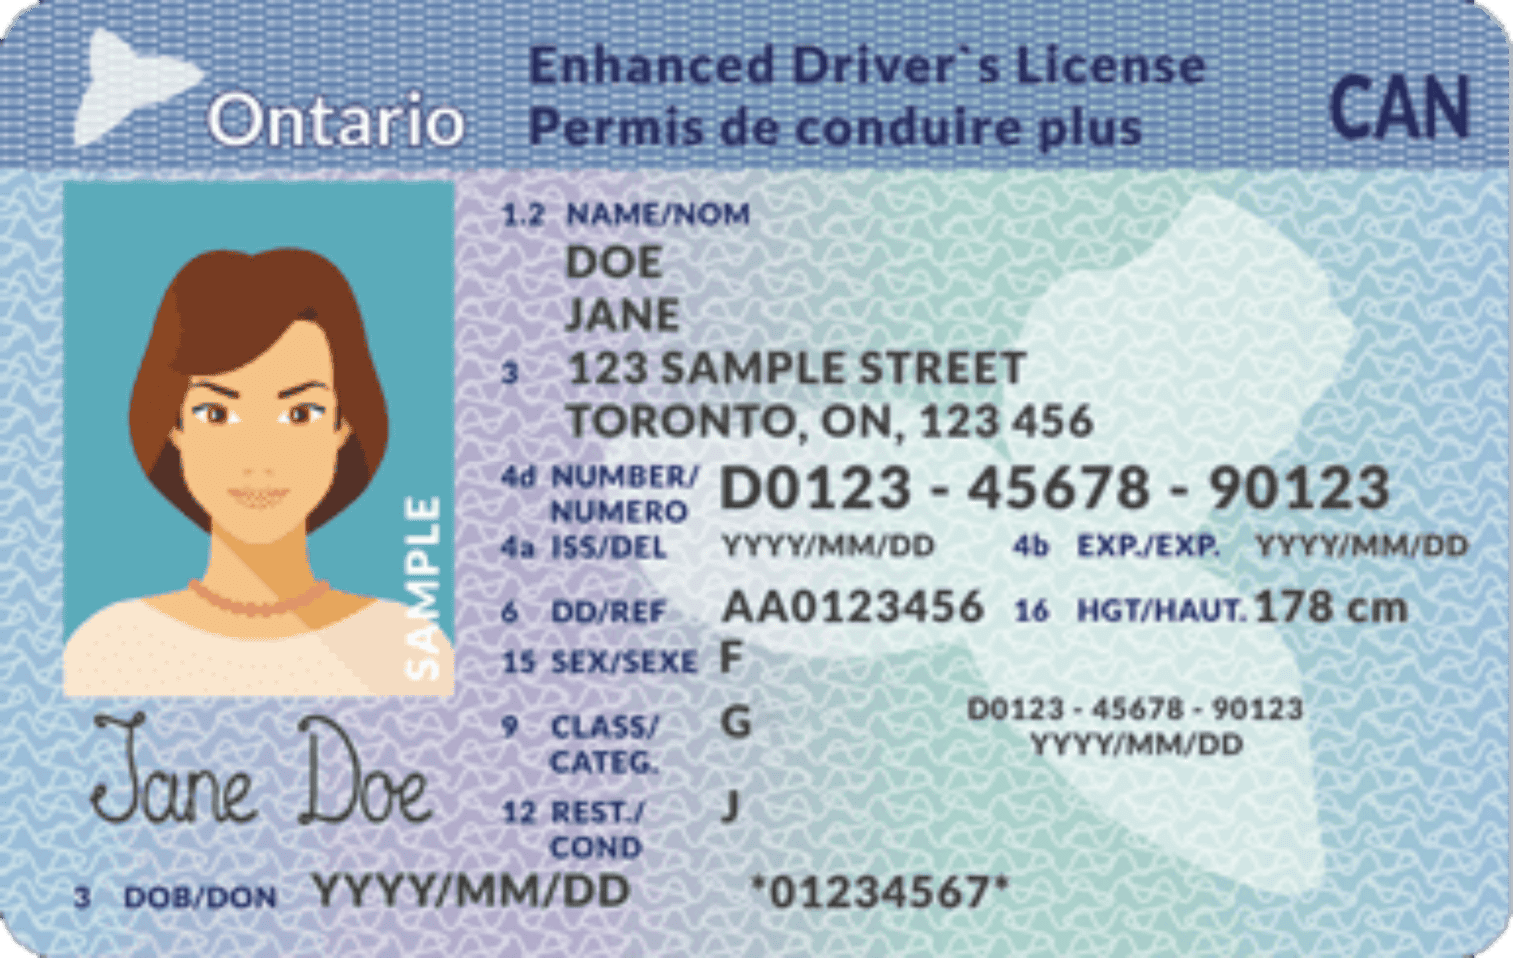 can i drive with indian license in canada